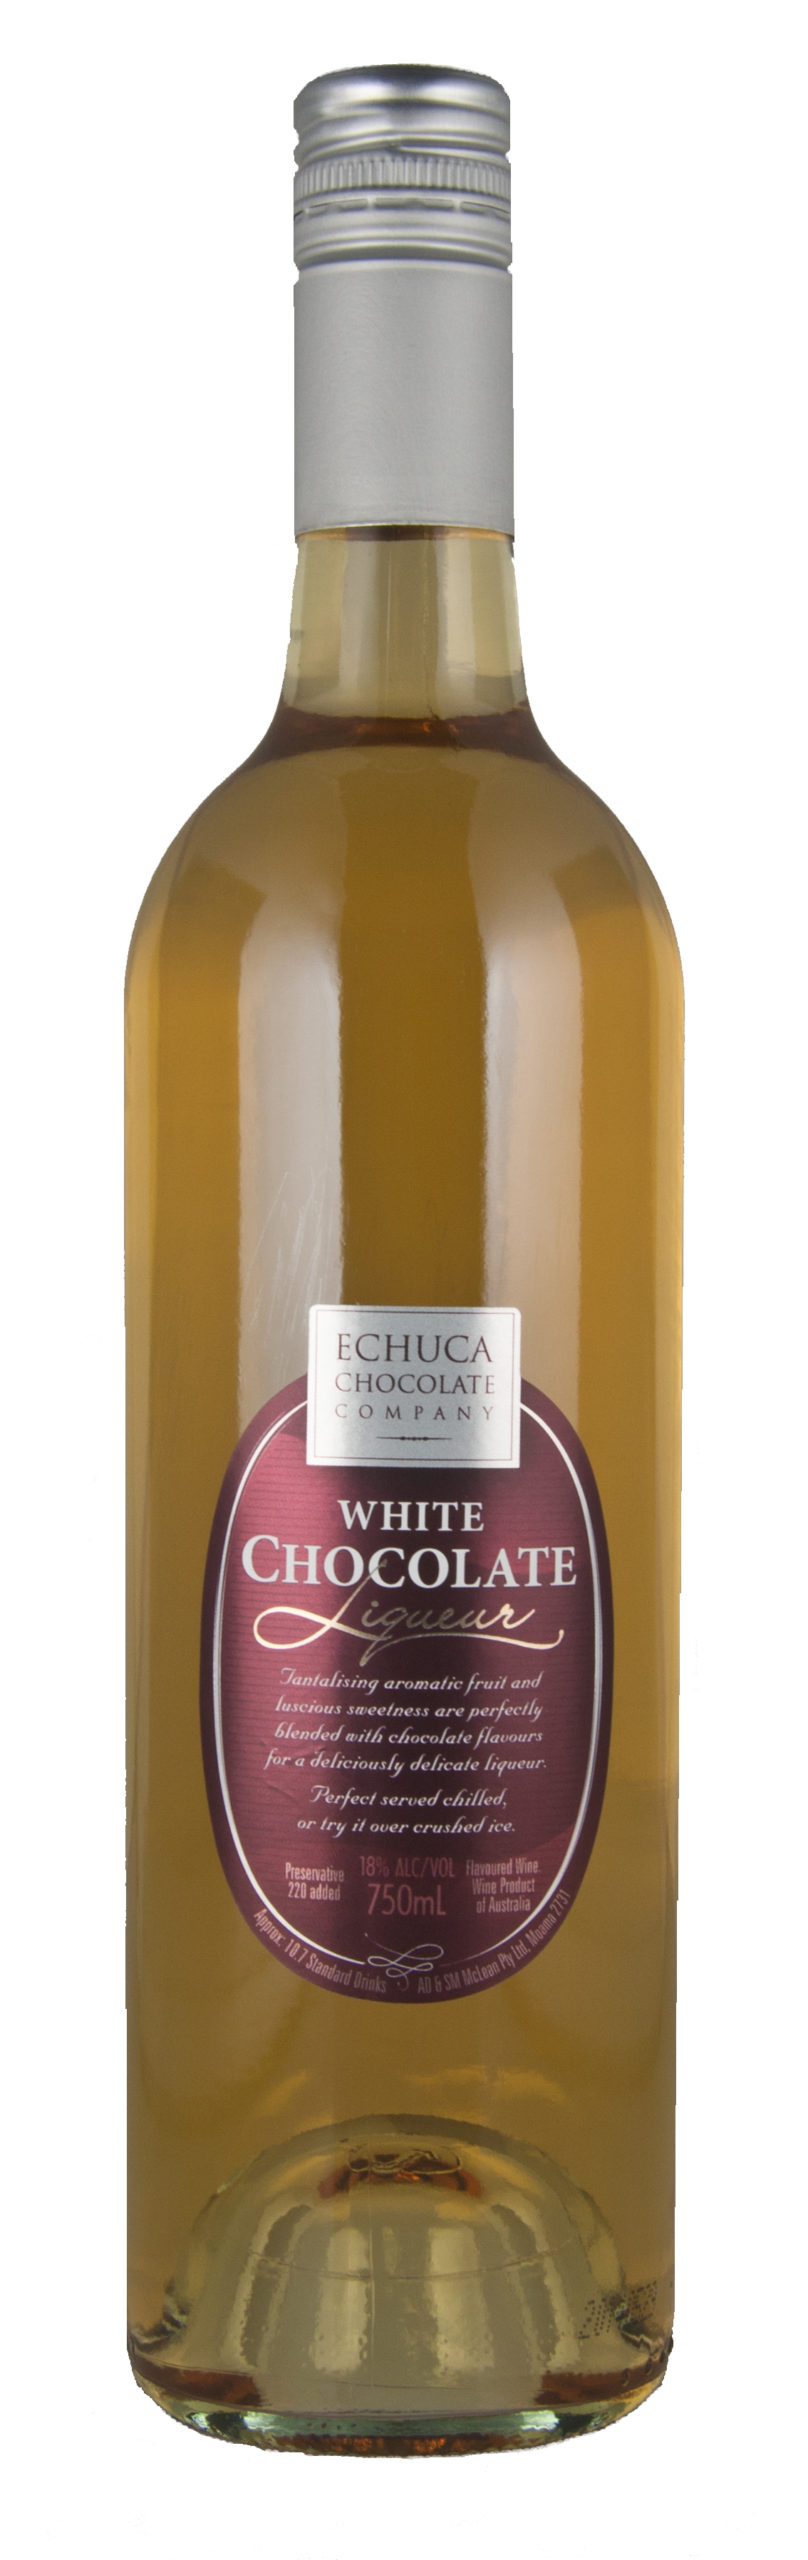 White Chocolate Liqueur from Echuca Chocolate Company